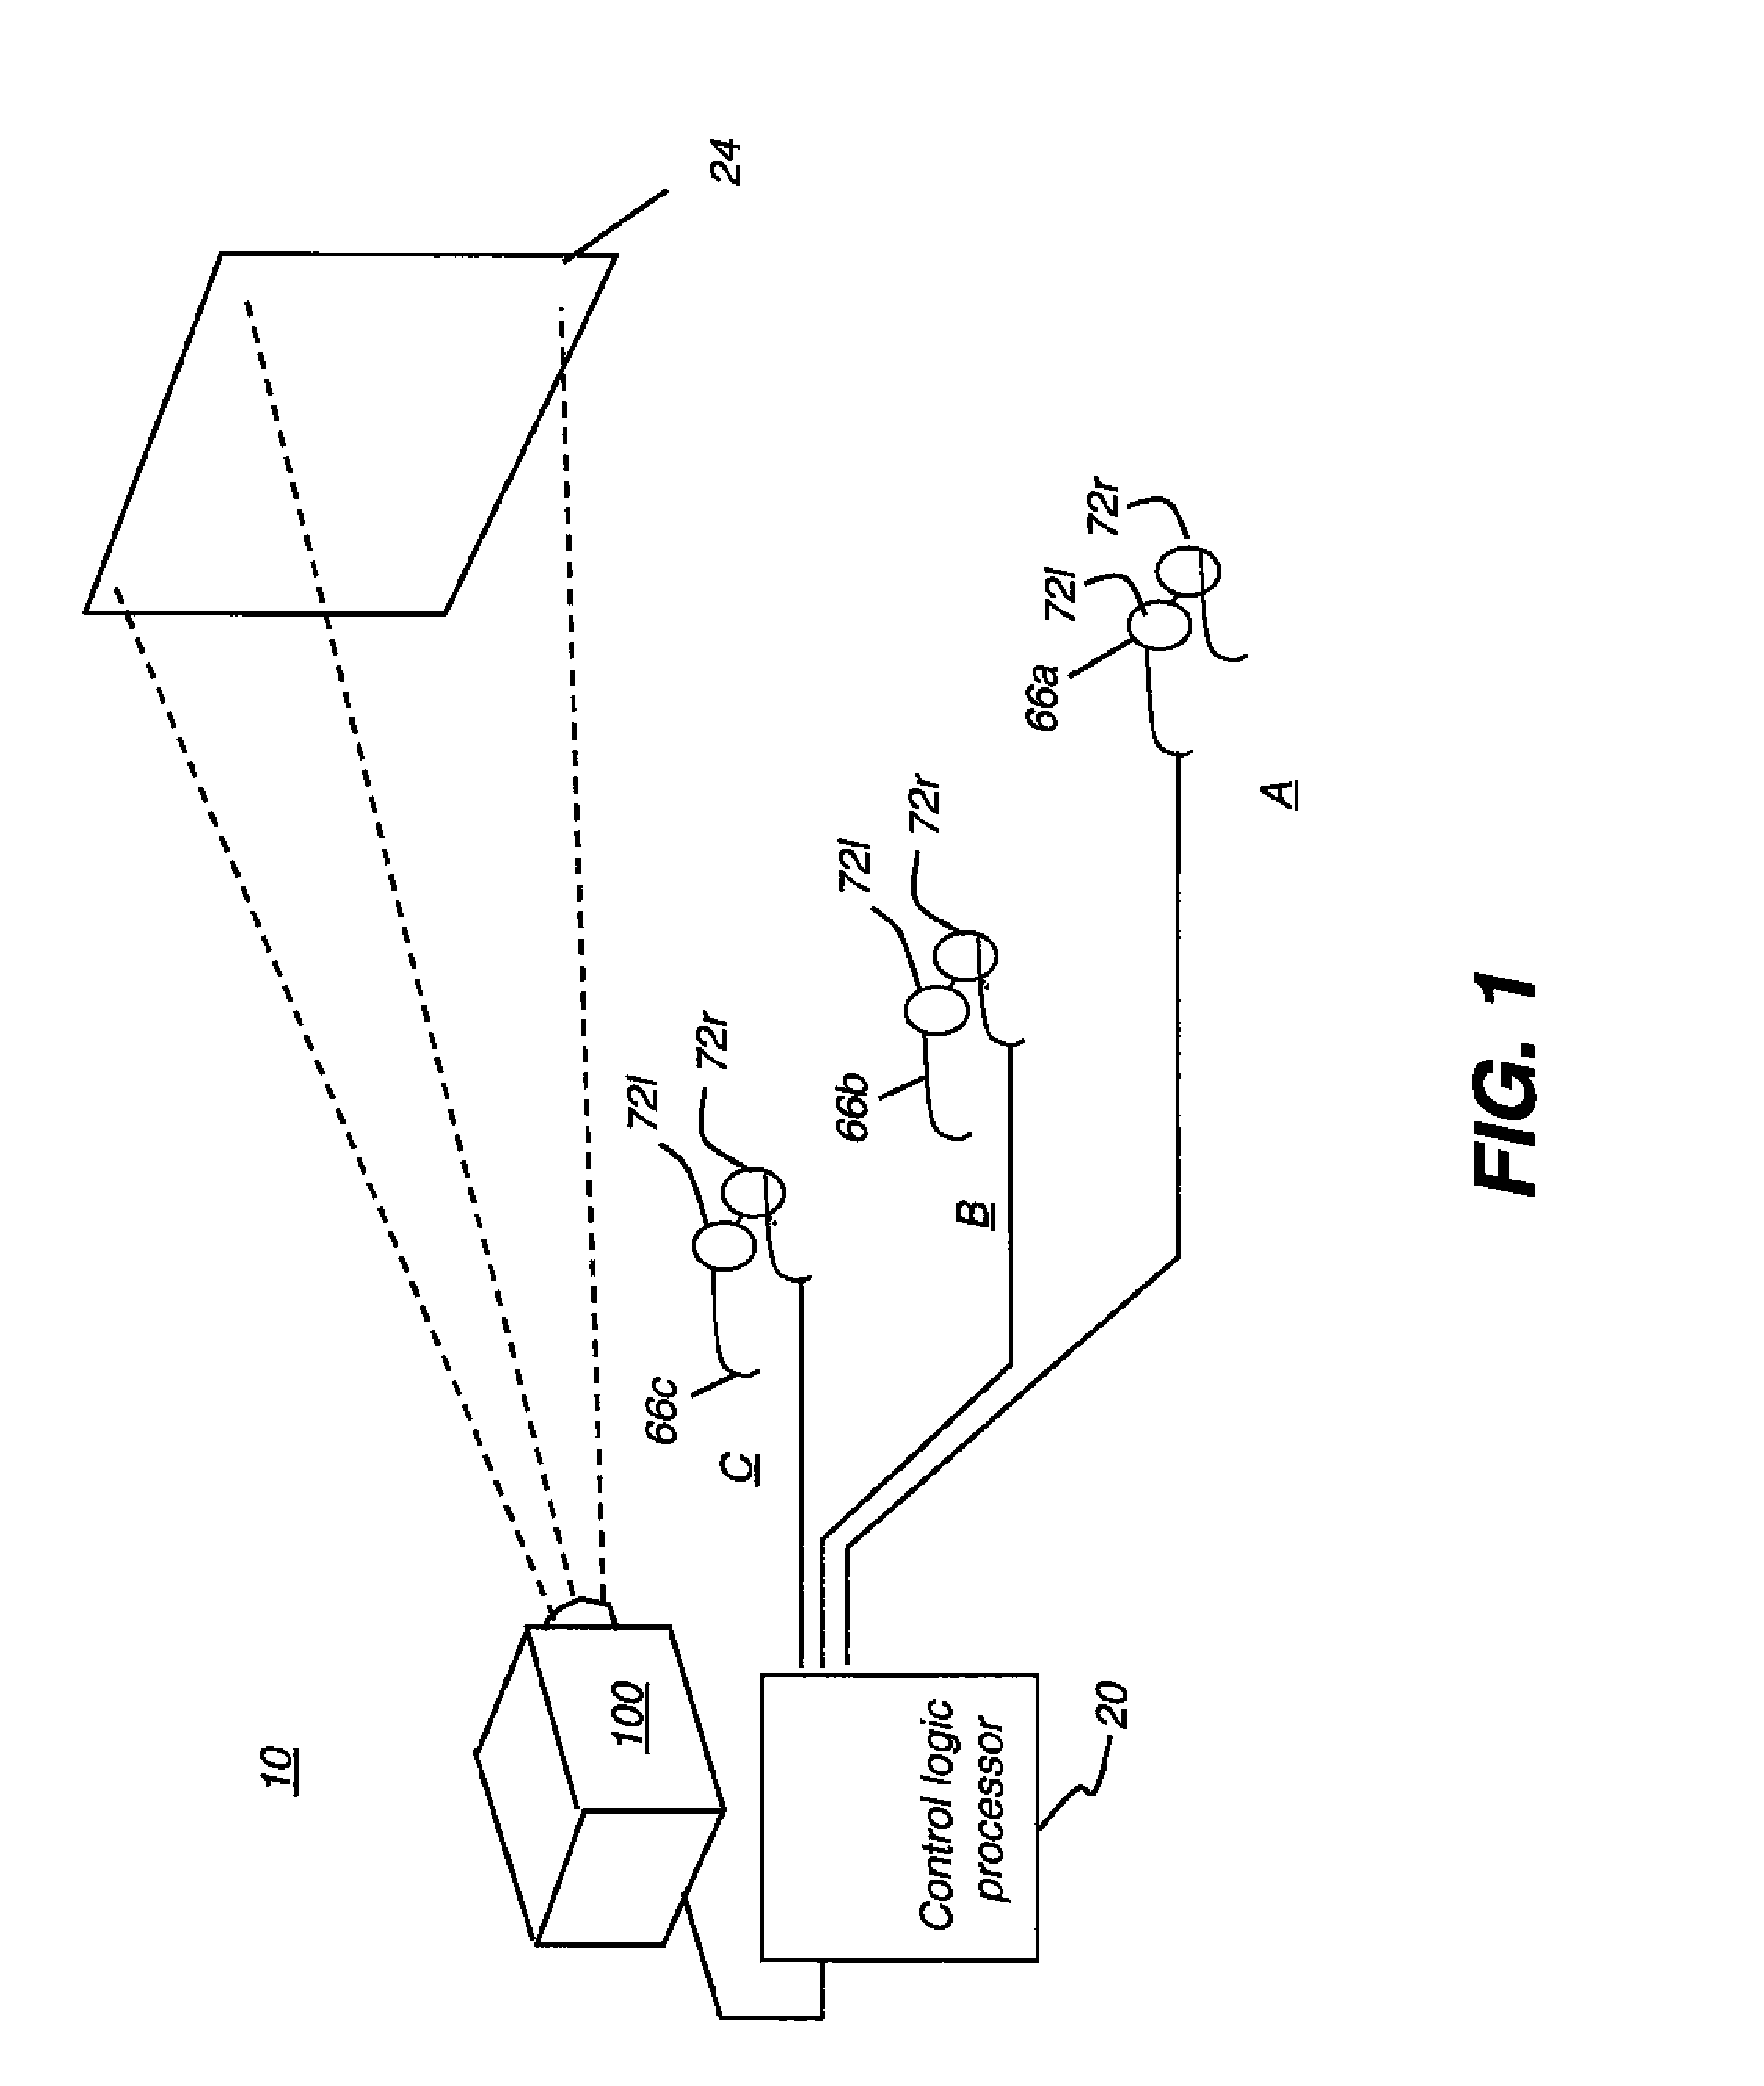 Stereoscopic display system with flexible rendering for multiple simultaneous observers